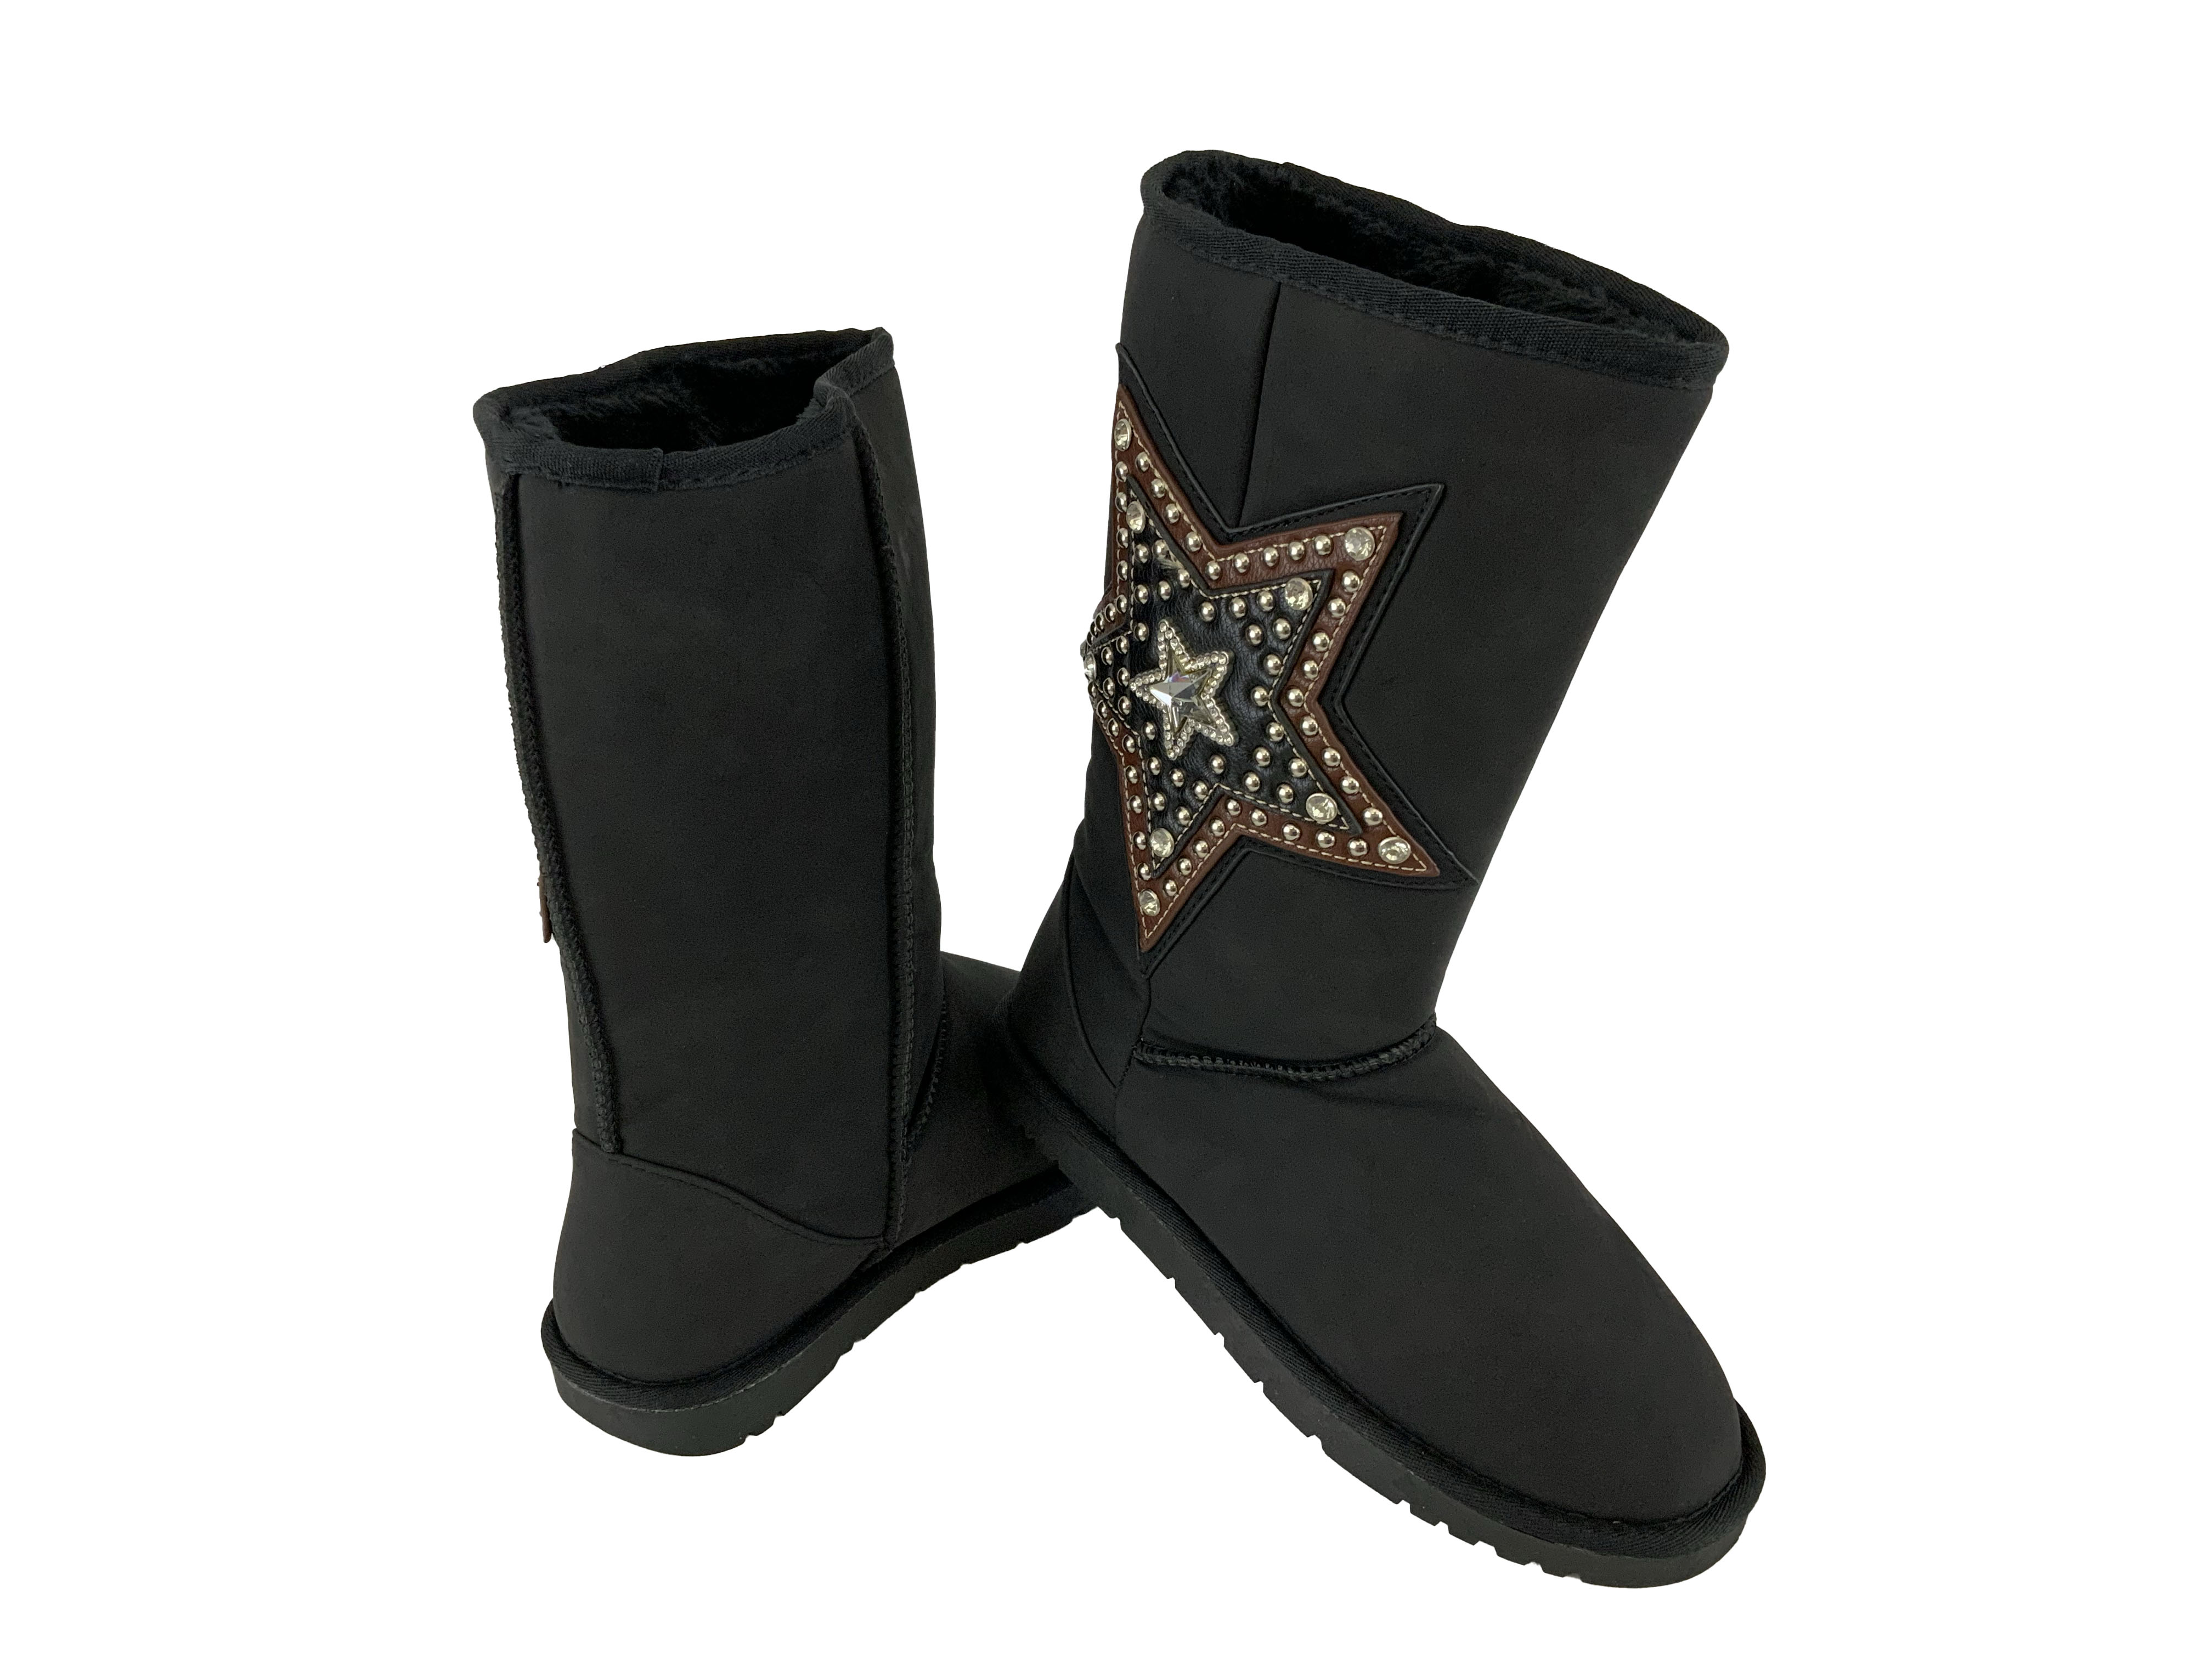 P&G Black suede tall boot with leather star and rhinestones